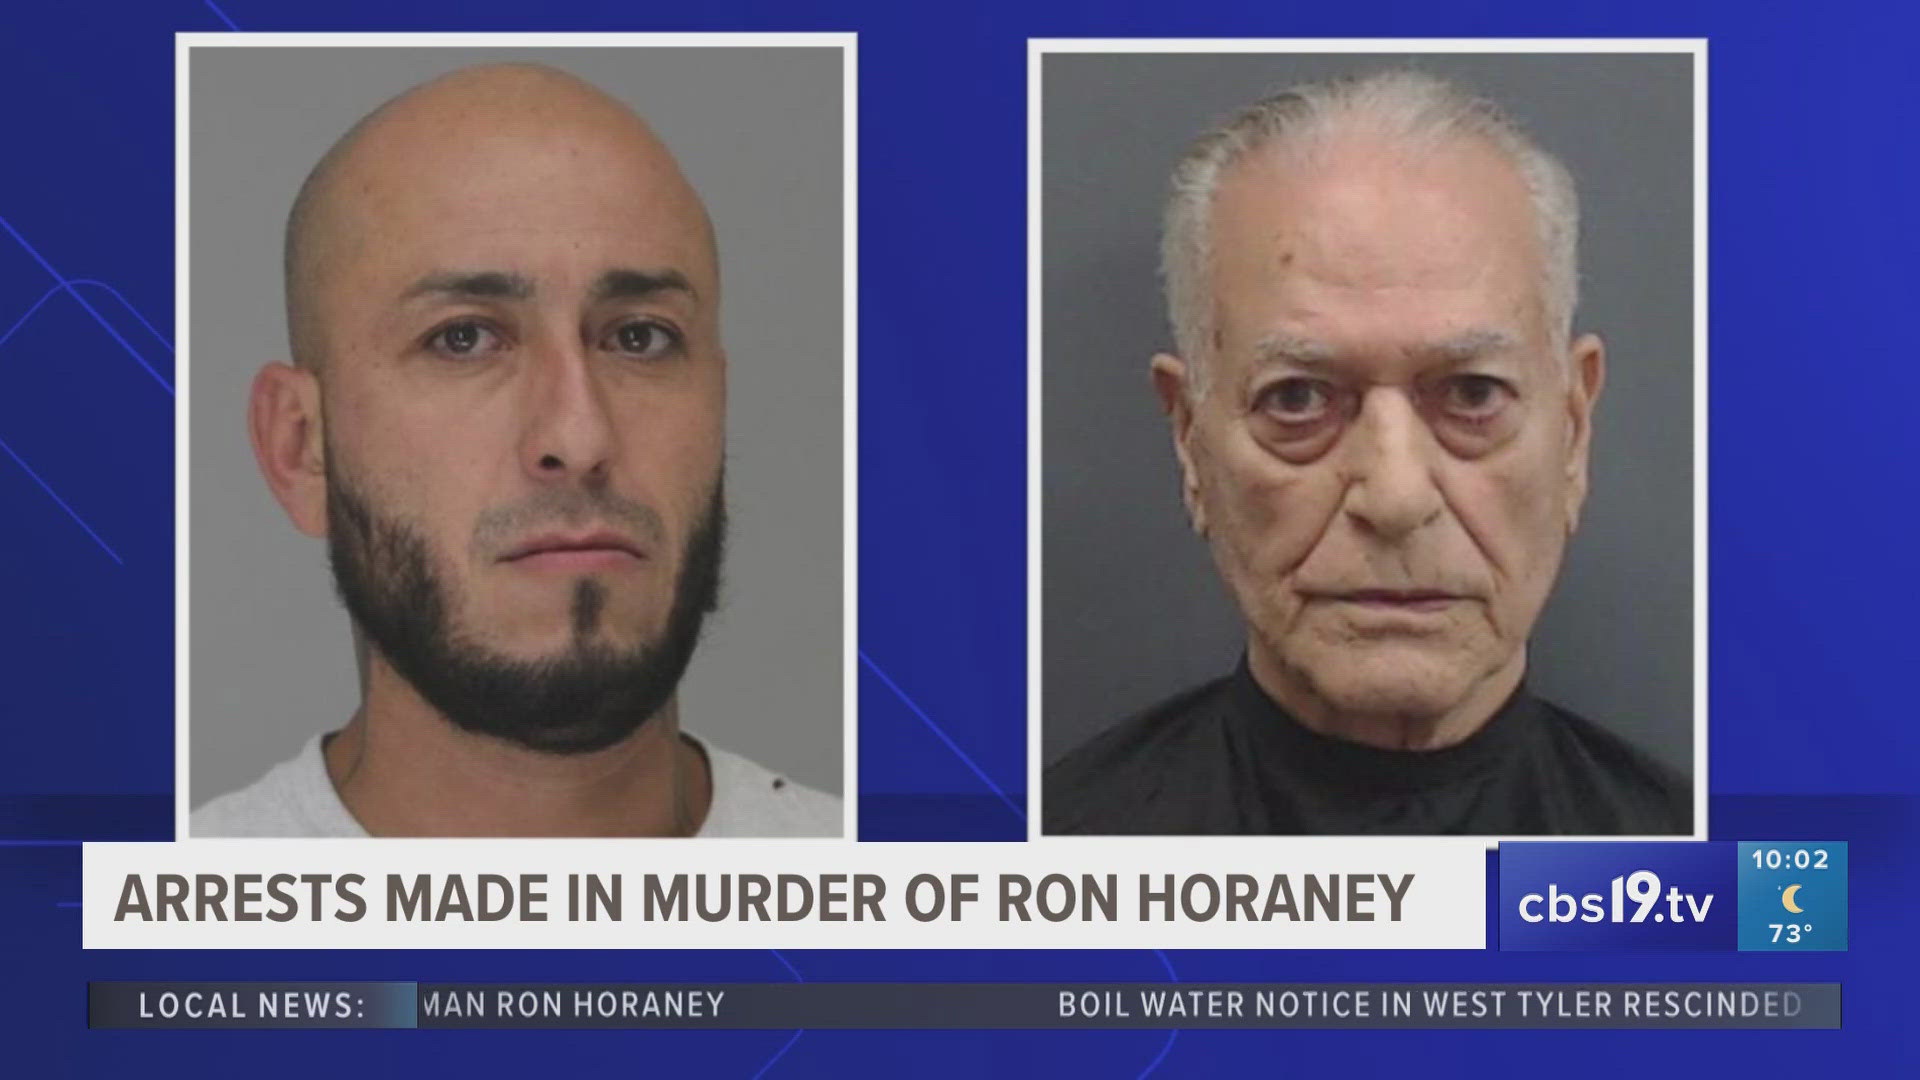 The case has been unsolved for nearly 10 years.  Officials say Horaney was killed as part of a murder-for-hire plot.